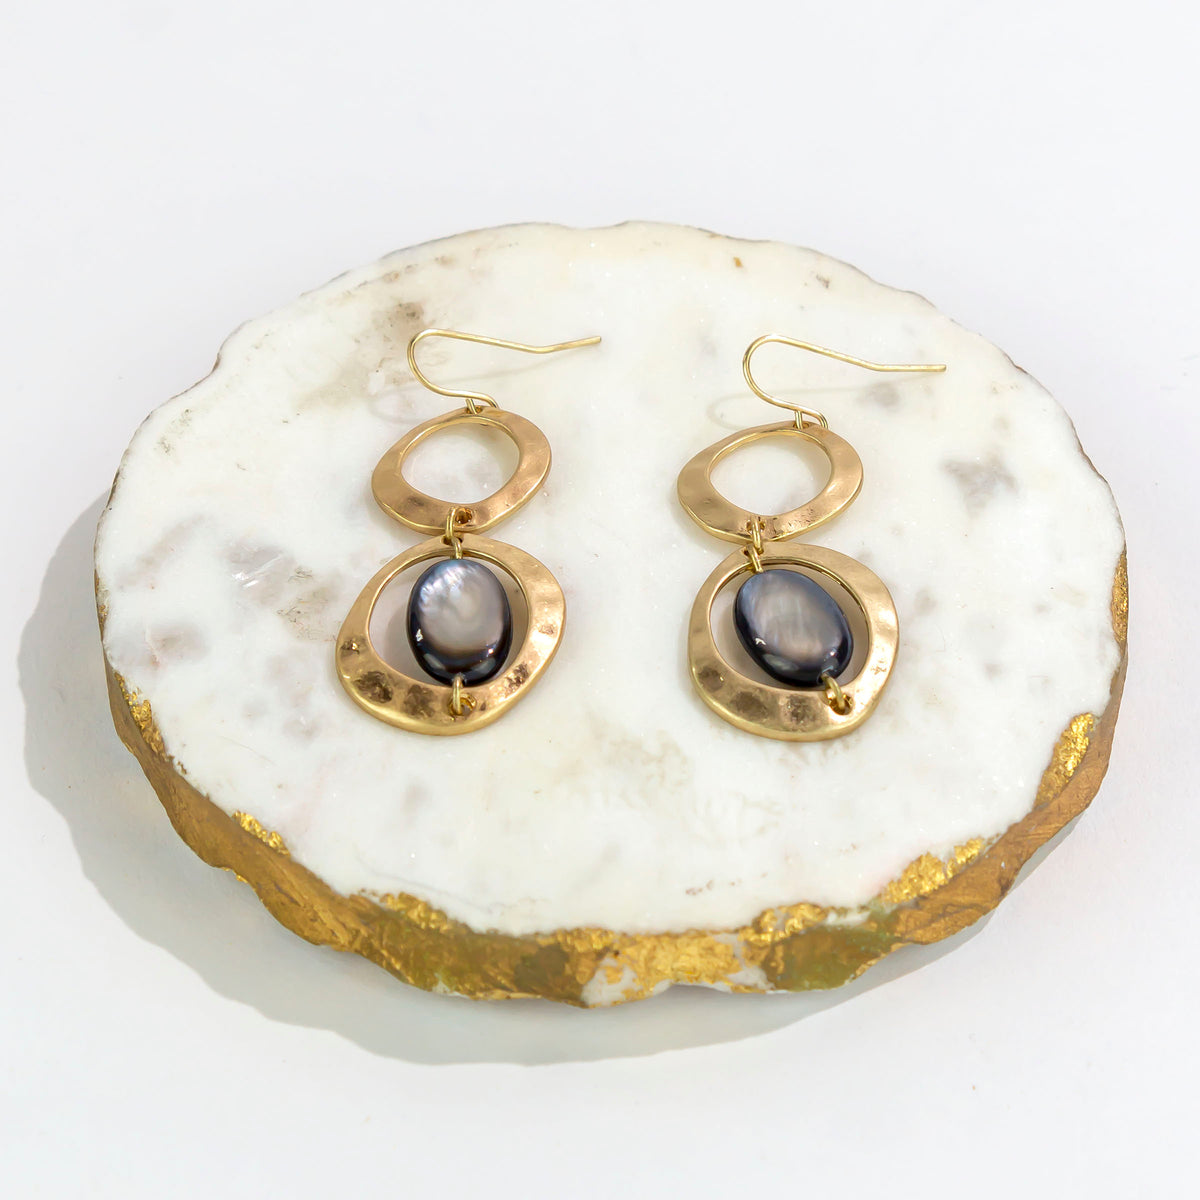 Dauplaise Jewelry - Double Drop Metal and Shell Earrings